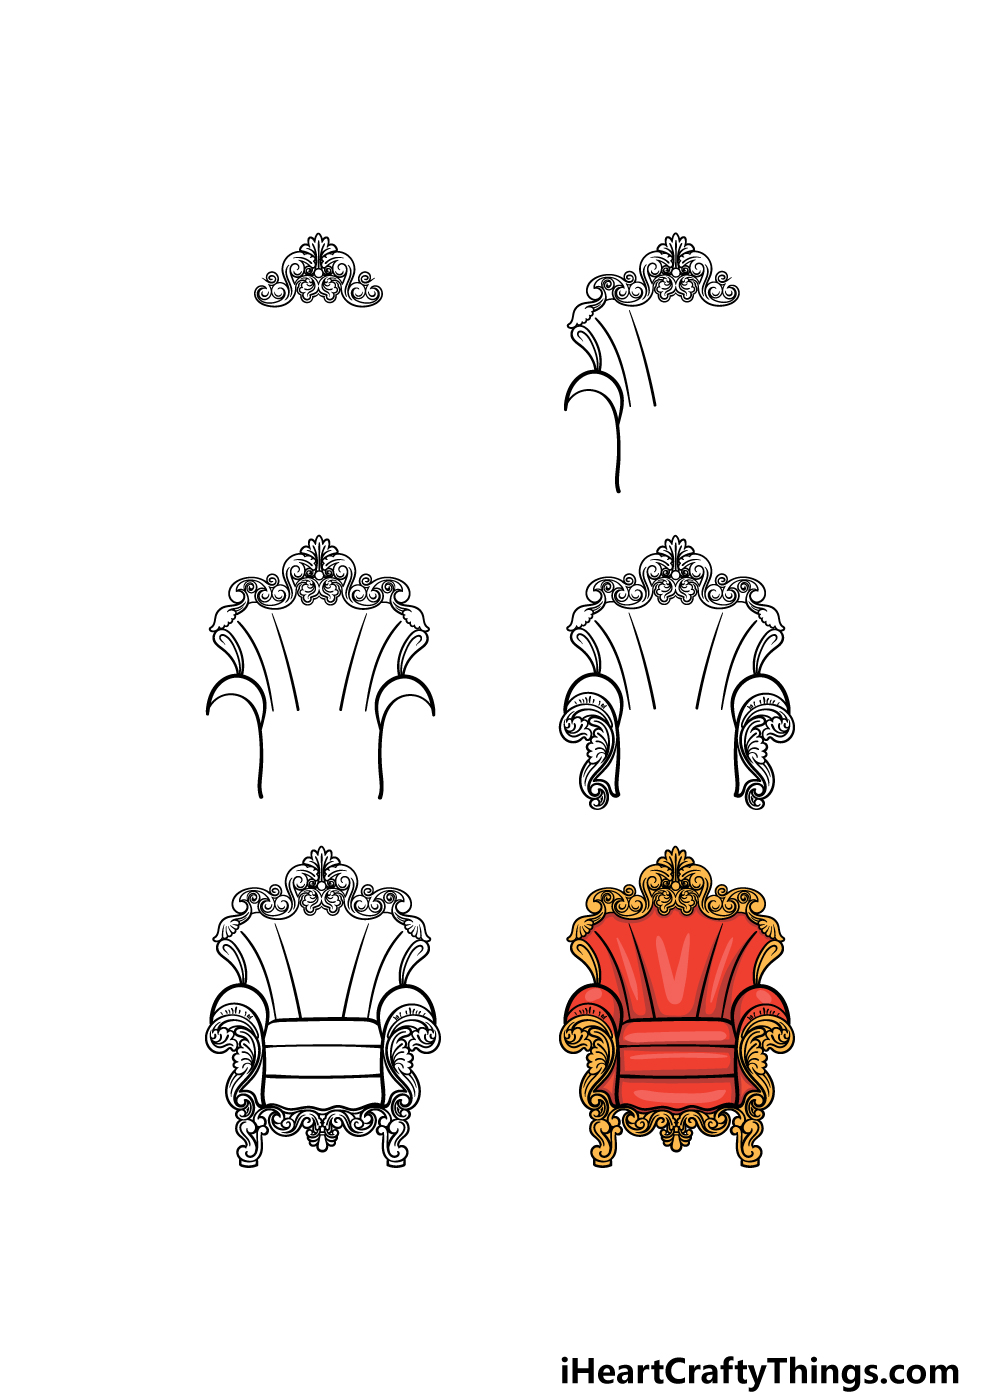 how to draw a Throne in 6 steps